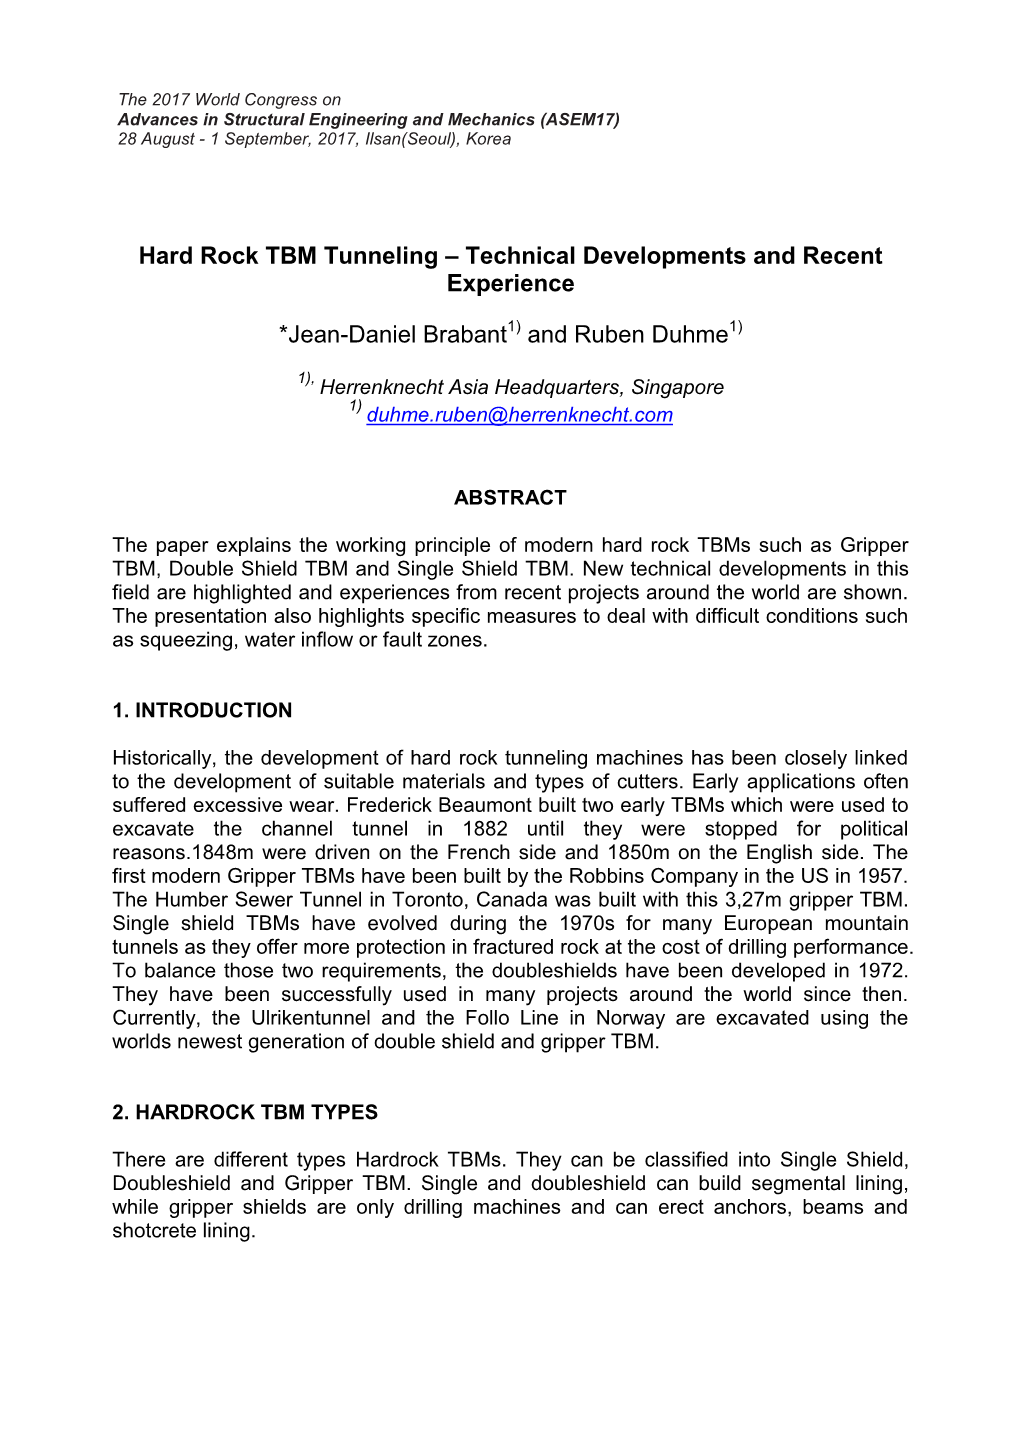 Hard Rock TBM Tunneling – Technical Developments and Recent Experience